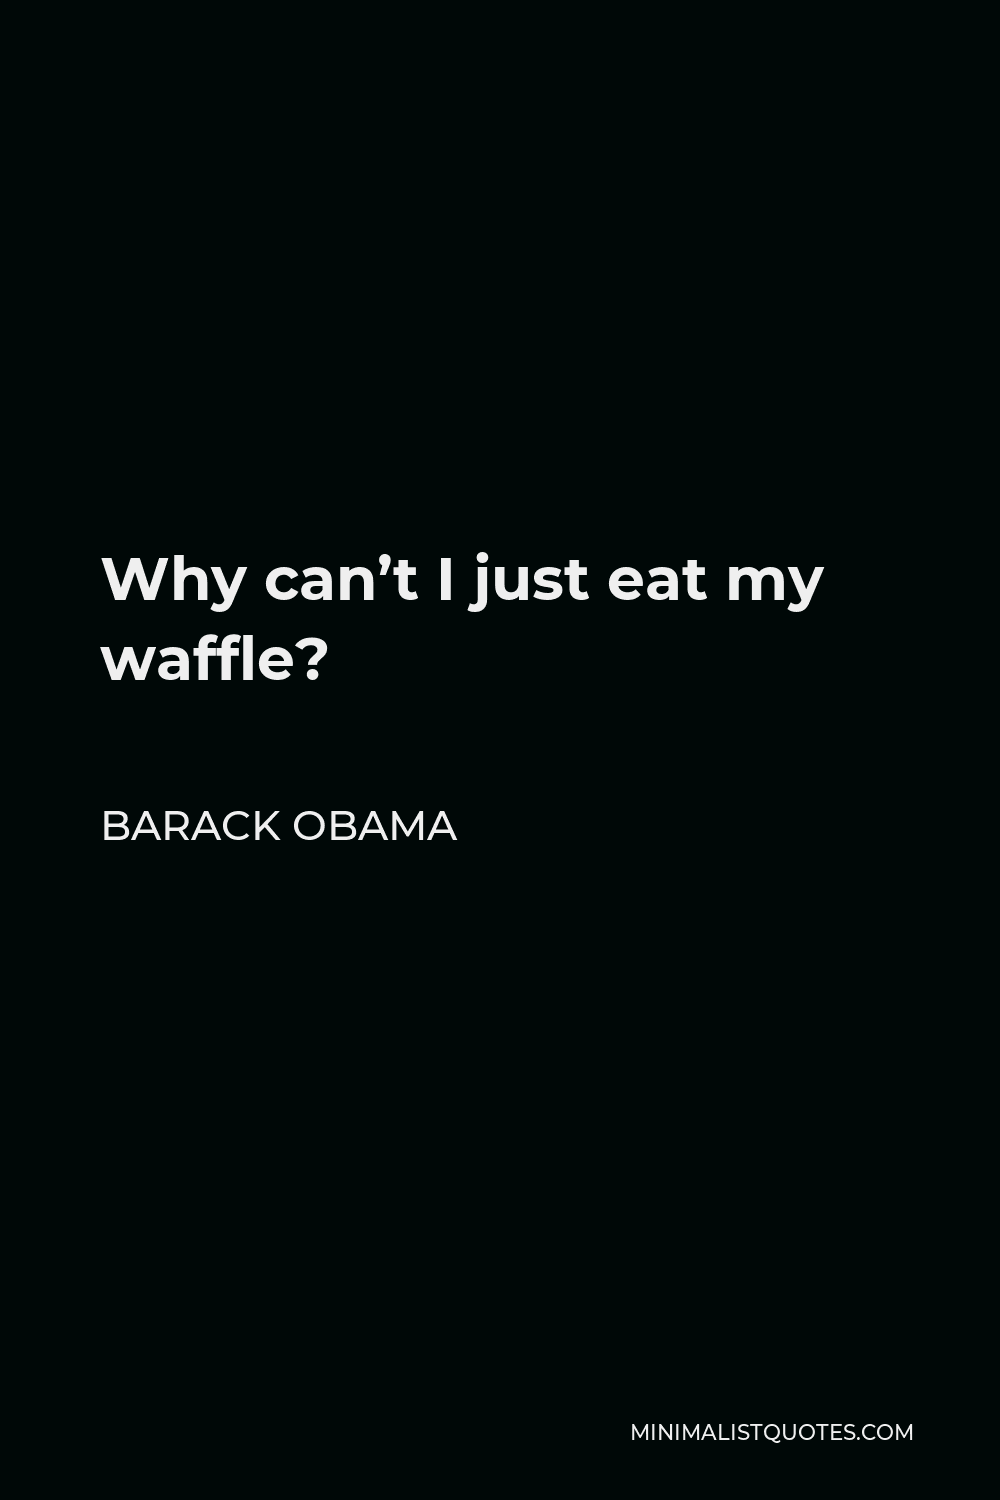 Barack Obama Quote - Why can’t I just eat my waffle?